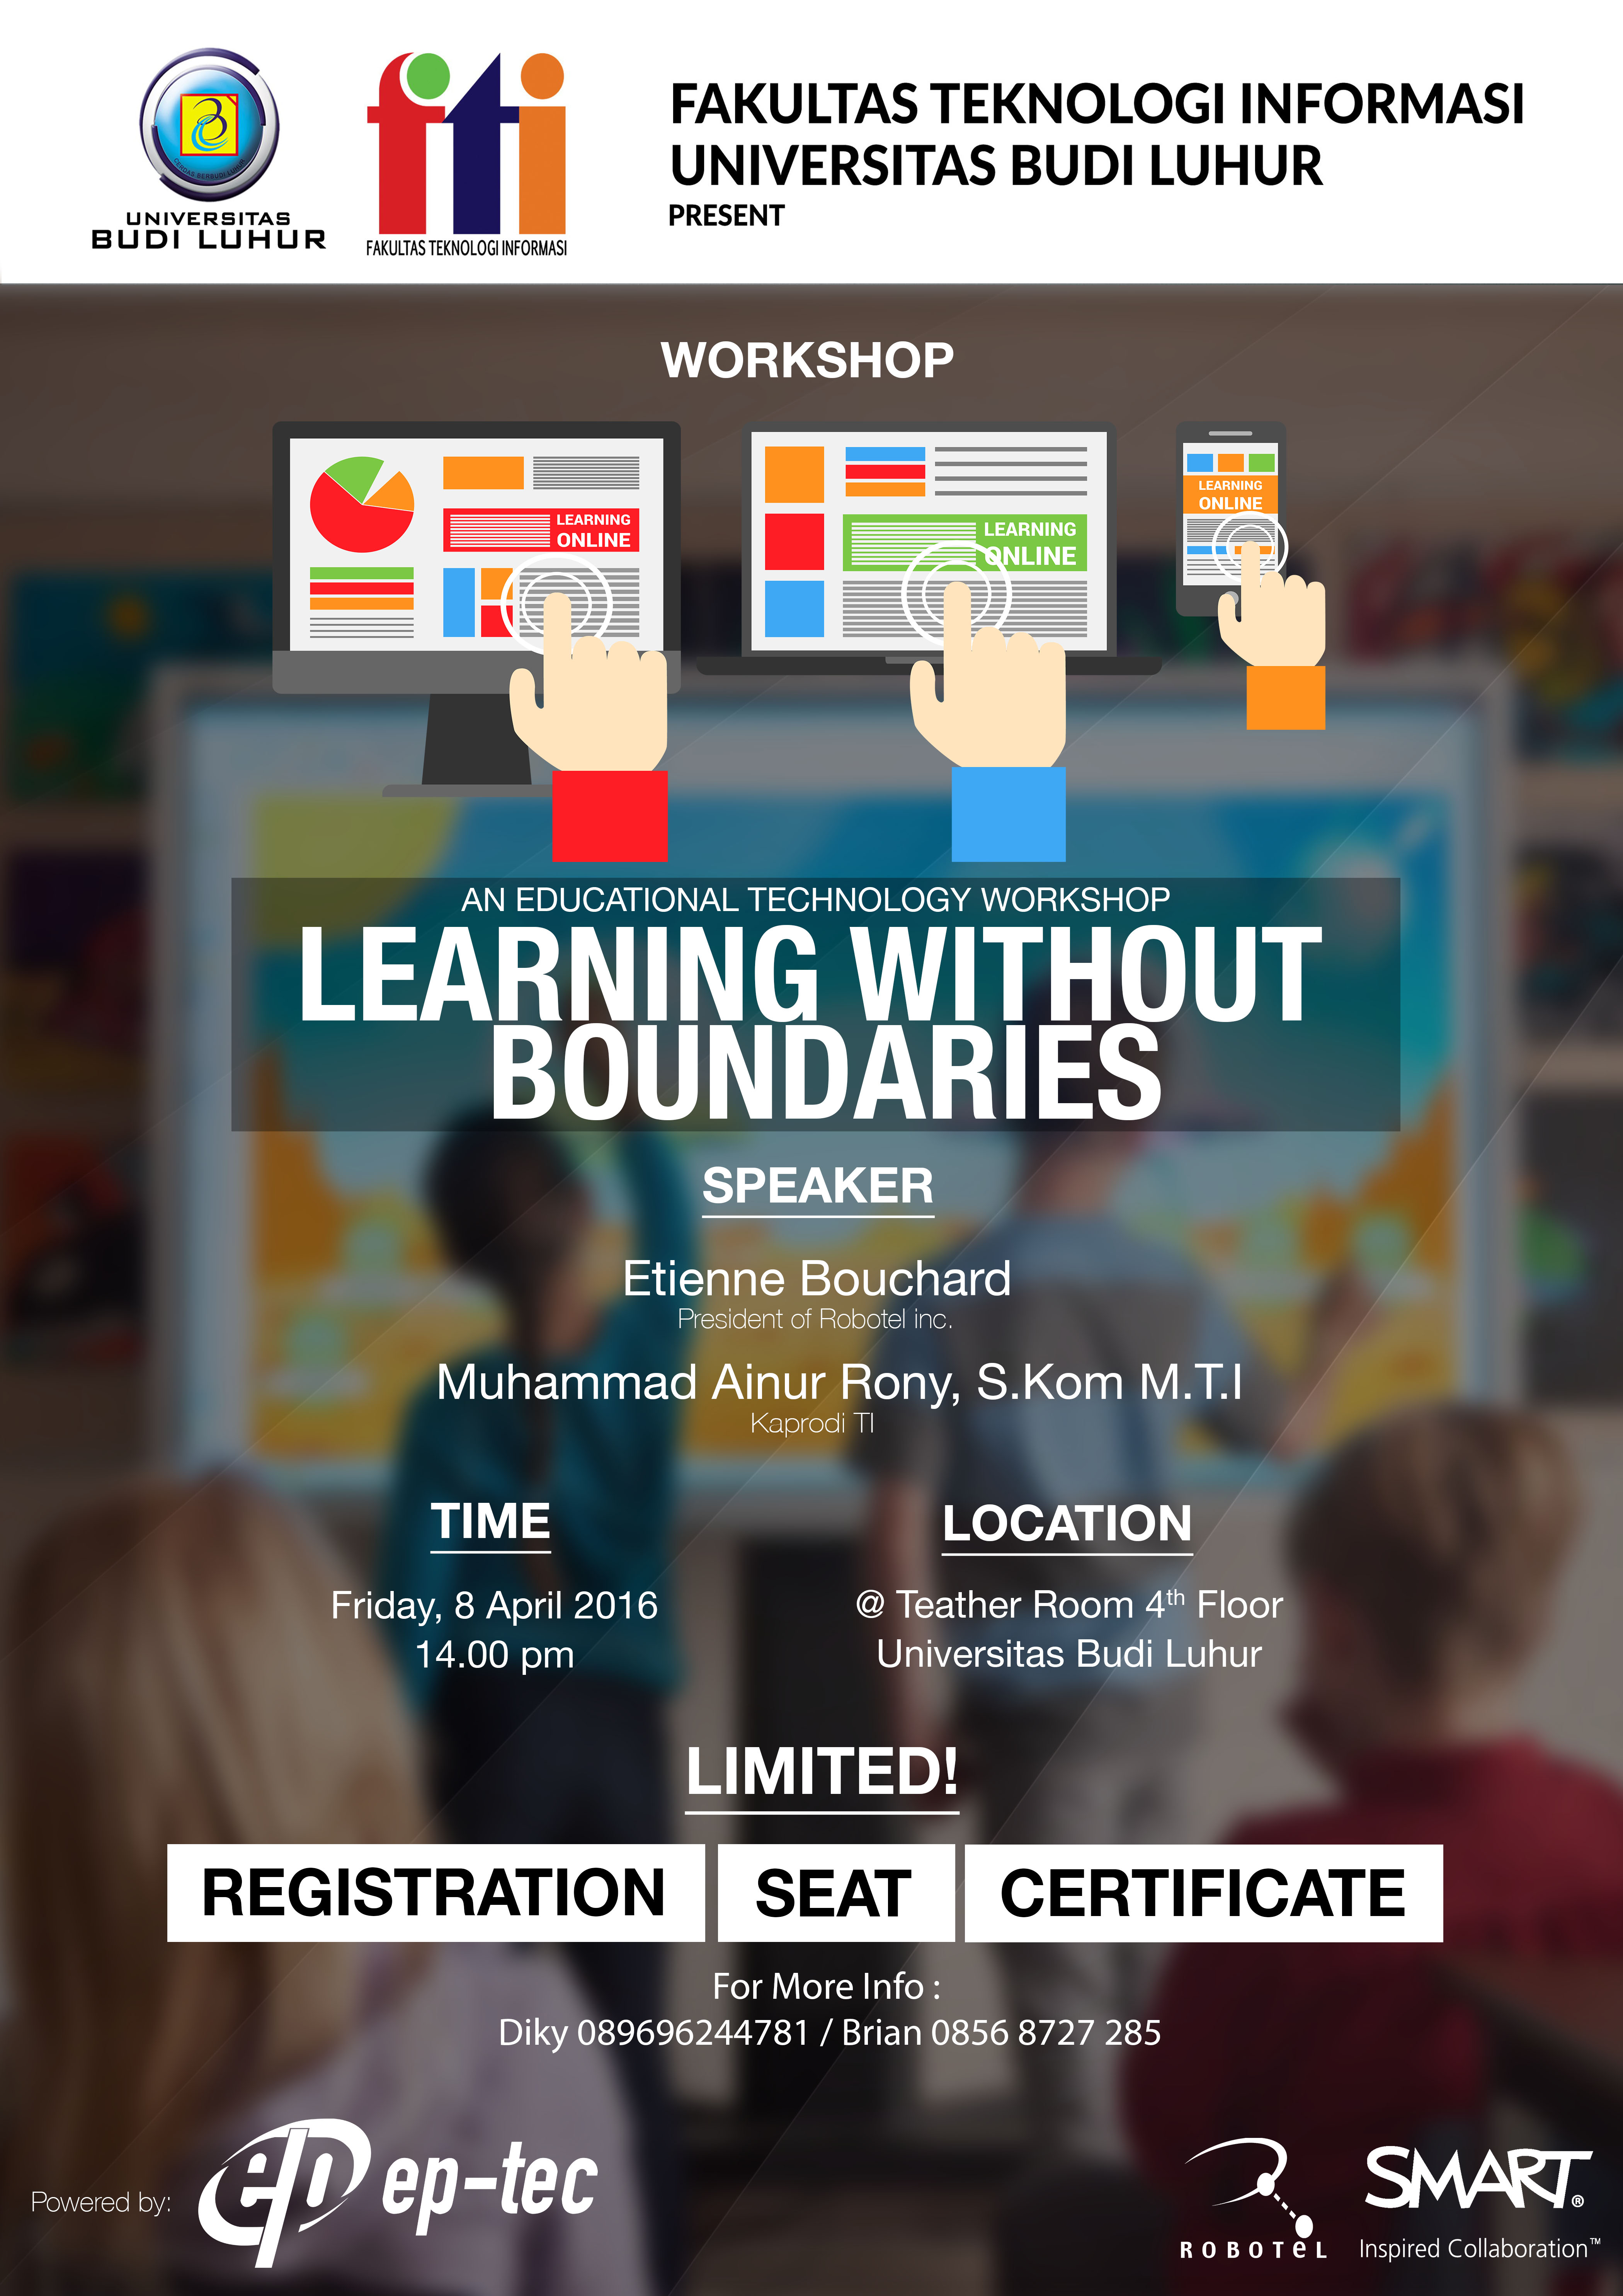 WORKSHOP  “LEARNING WITHOUT BOUNDARIES”